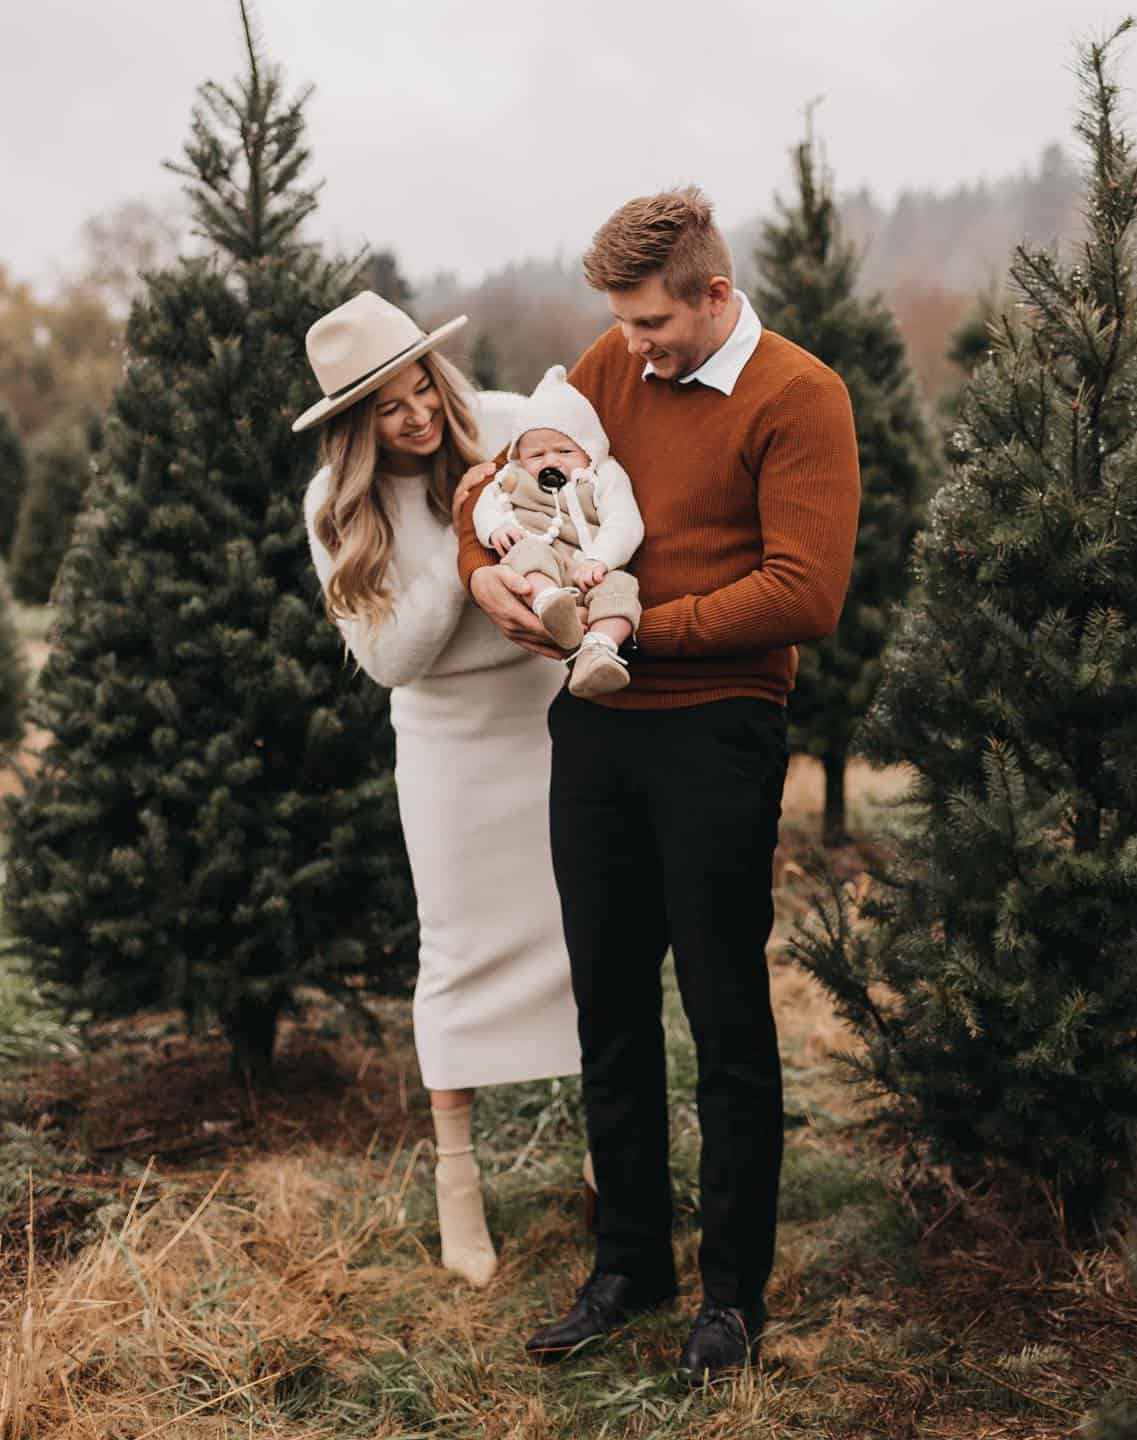 A Christmas family photoshoot with a family of three wearing knit pieces in brown, white, and black